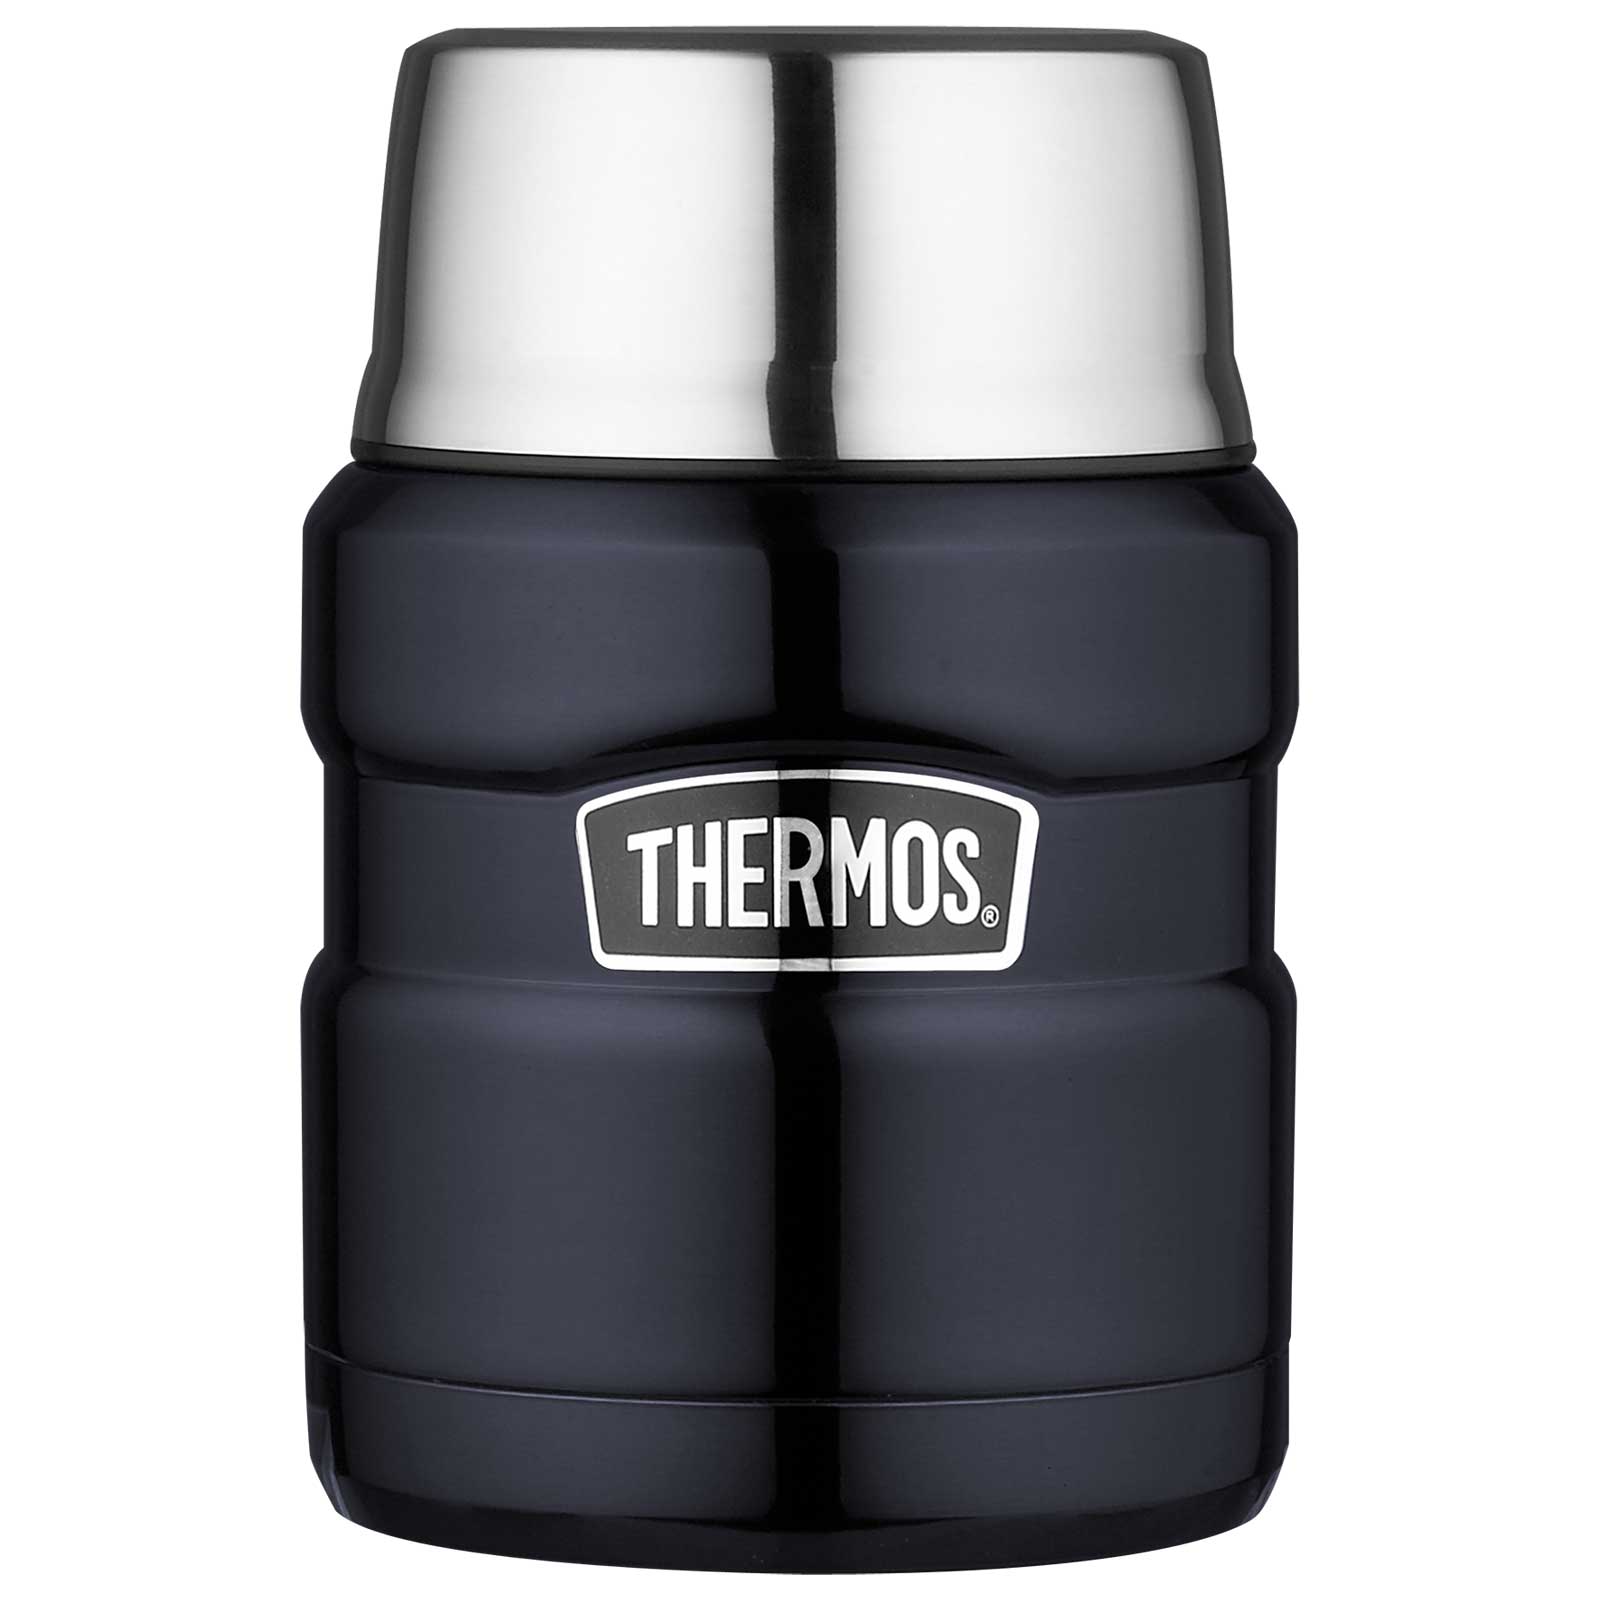 Productfoto van THERMOS® Stainless King Insulated Food Jar 0.47L - midnight blue polished